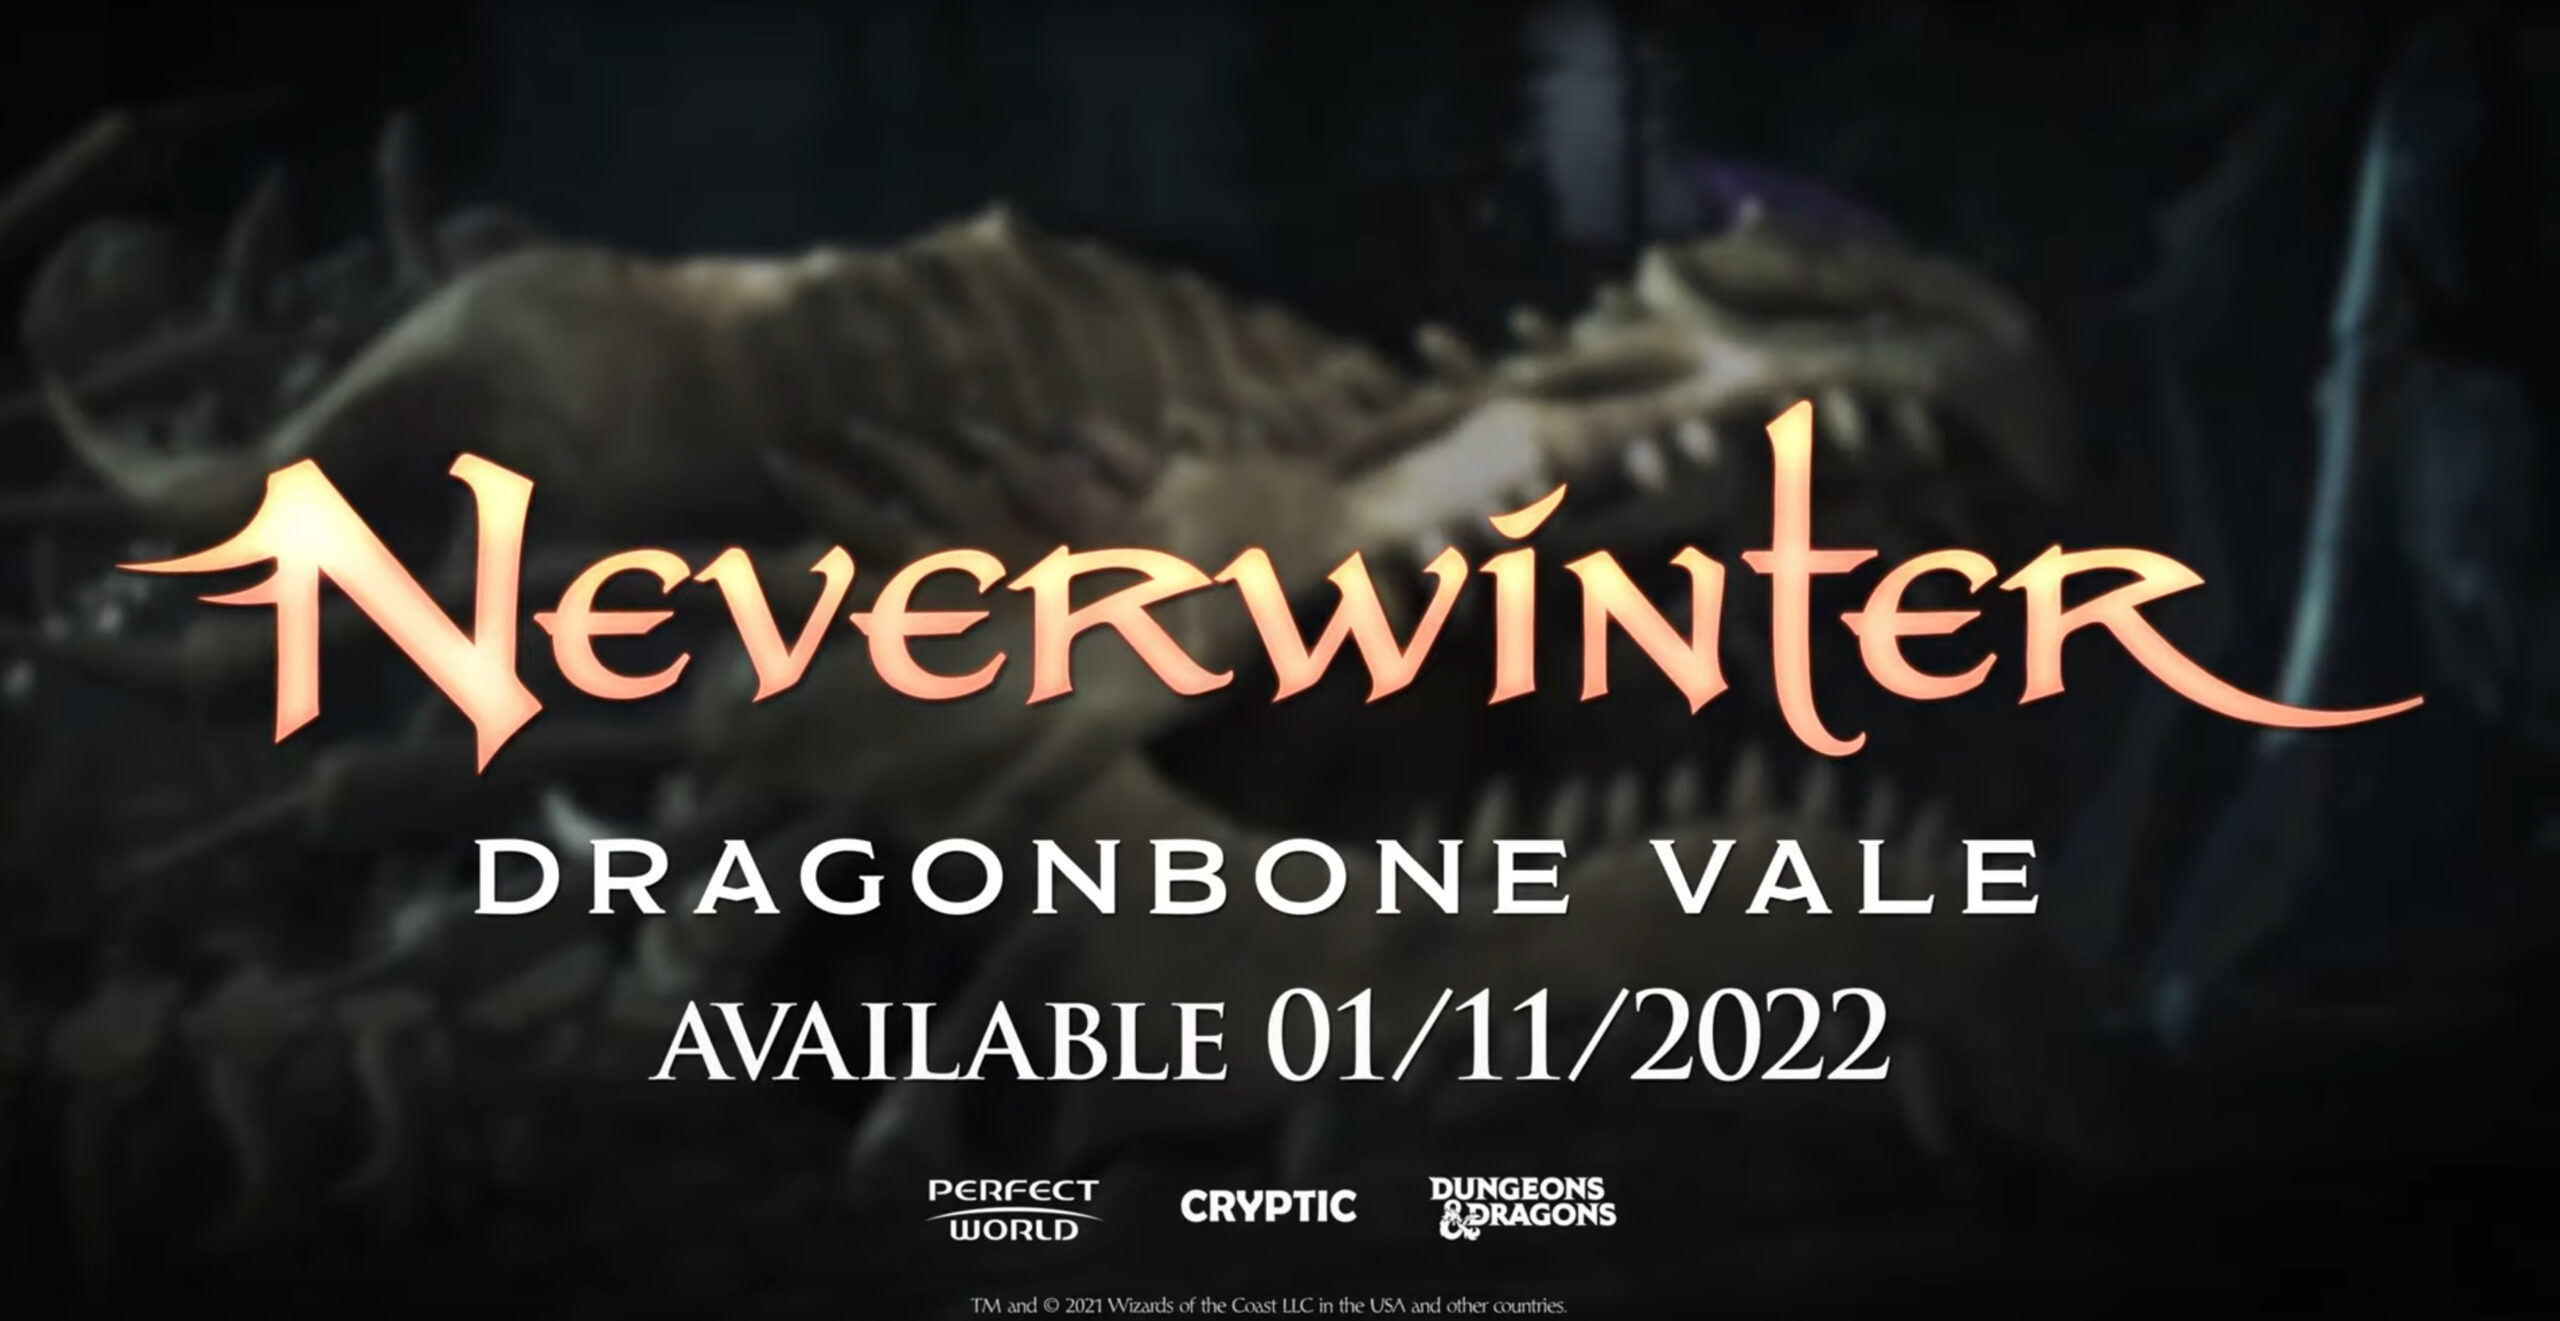 Neverwinter’s 22nd Module Dragonbone Vale Will Be Out Jan. 11(PC) and Feb. 8th (Console)